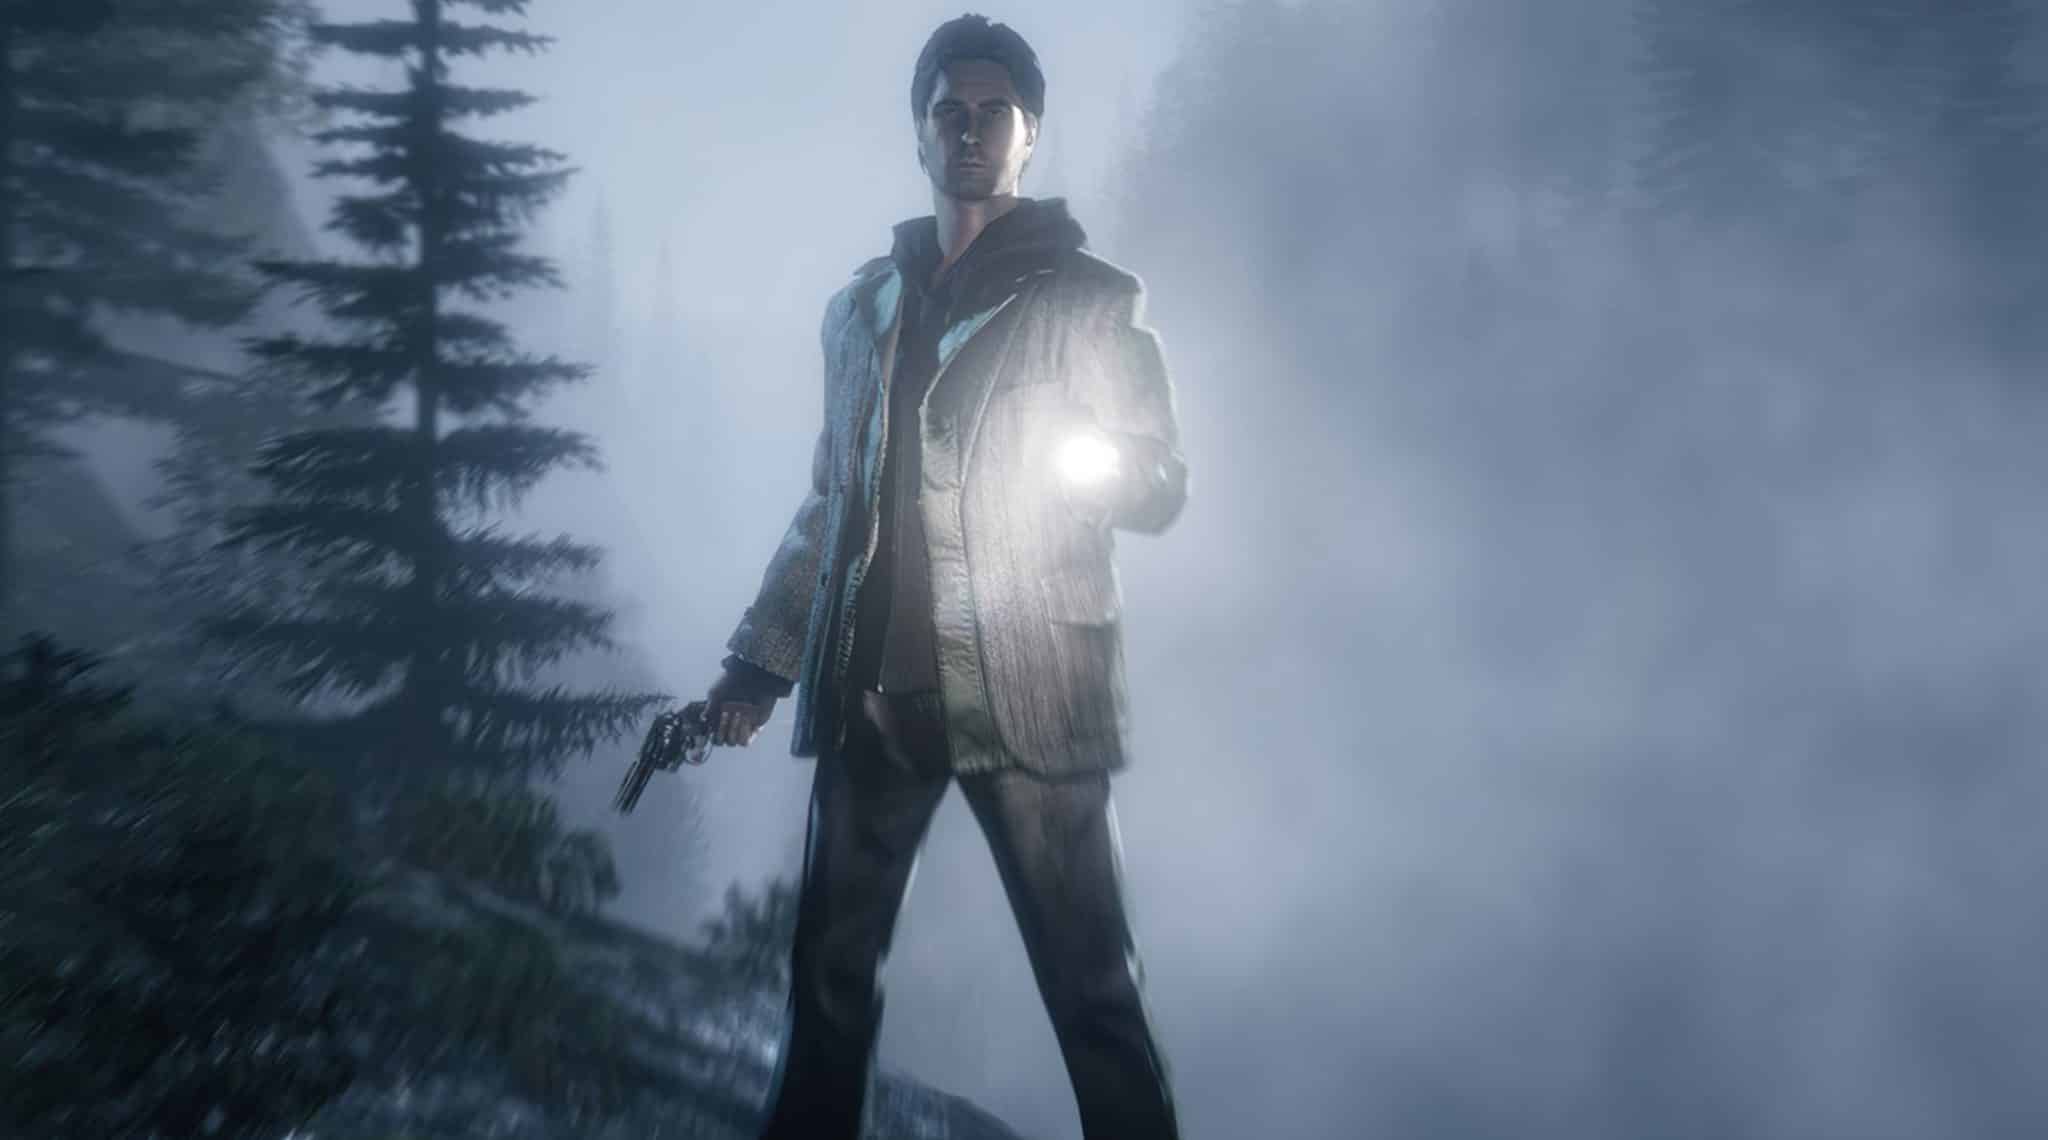 Alan Wake Remastered launching for PS5, PC, and Xbox Series X this